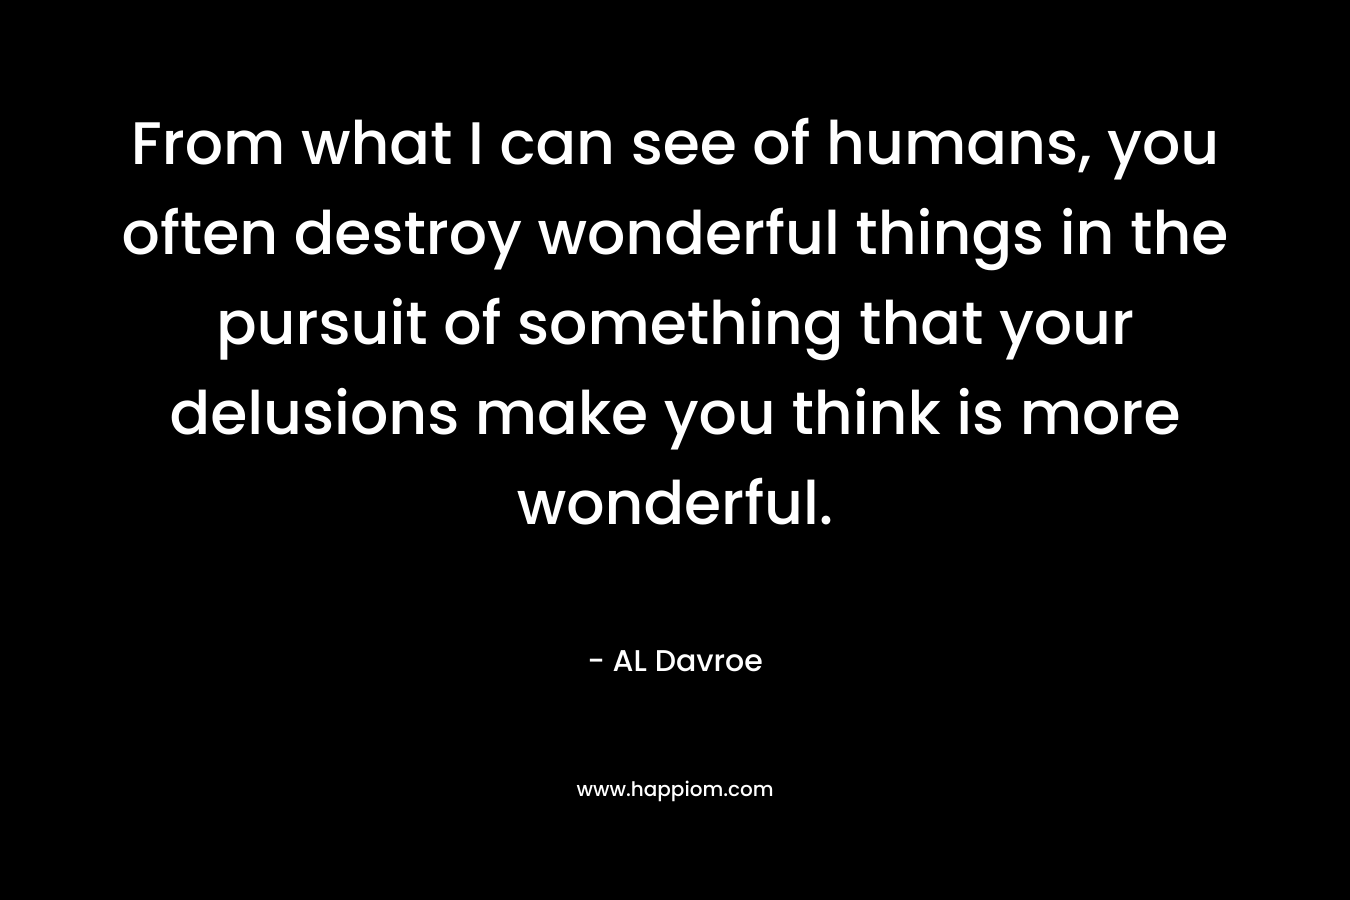 From what I can see of humans, you often destroy wonderful things in the pursuit of something that your delusions make you think is more wonderful. – AL Davroe